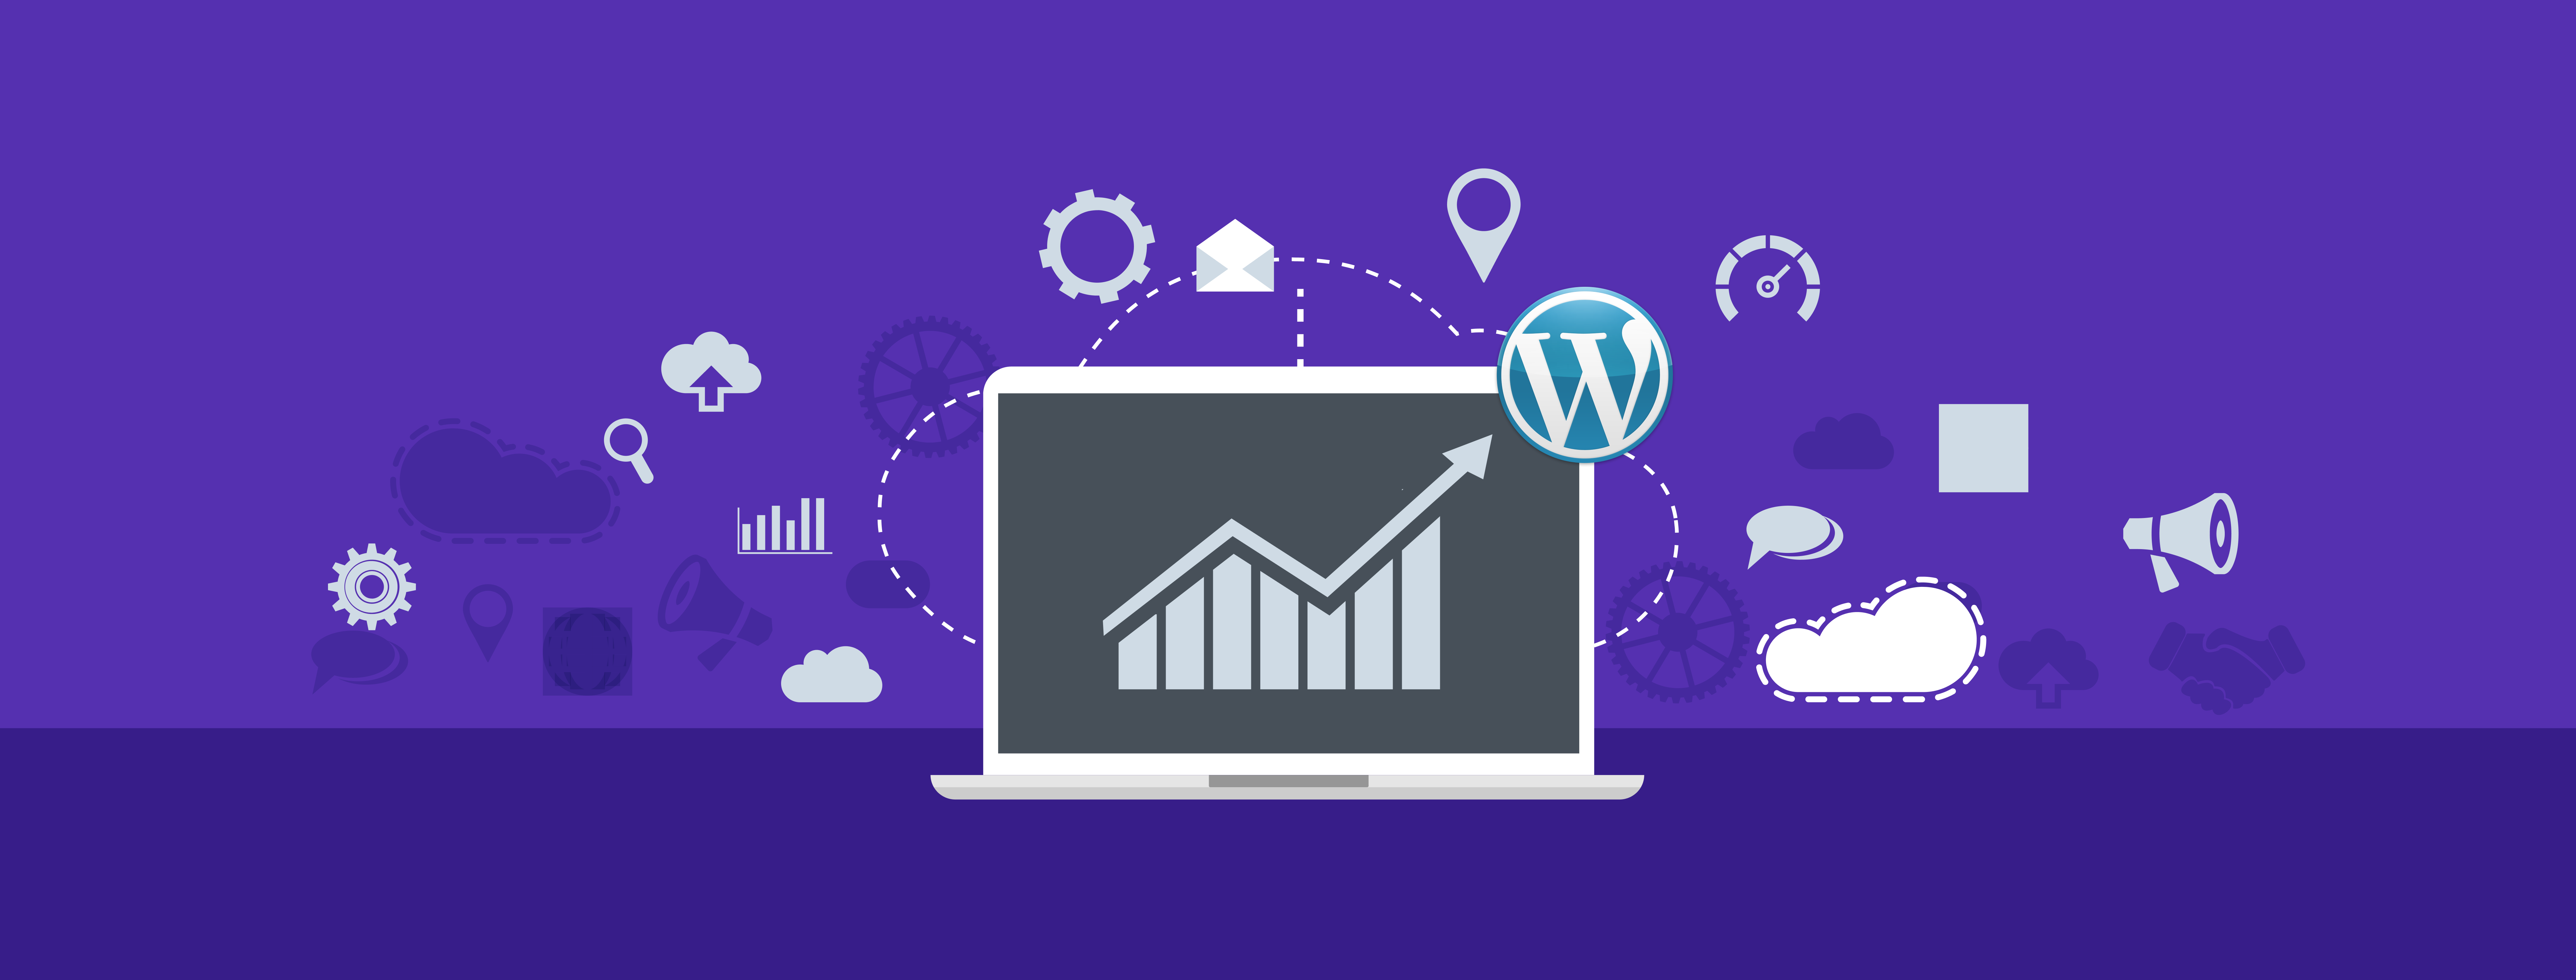 Analytics For WordPress: Data & Insights That Drive Growth